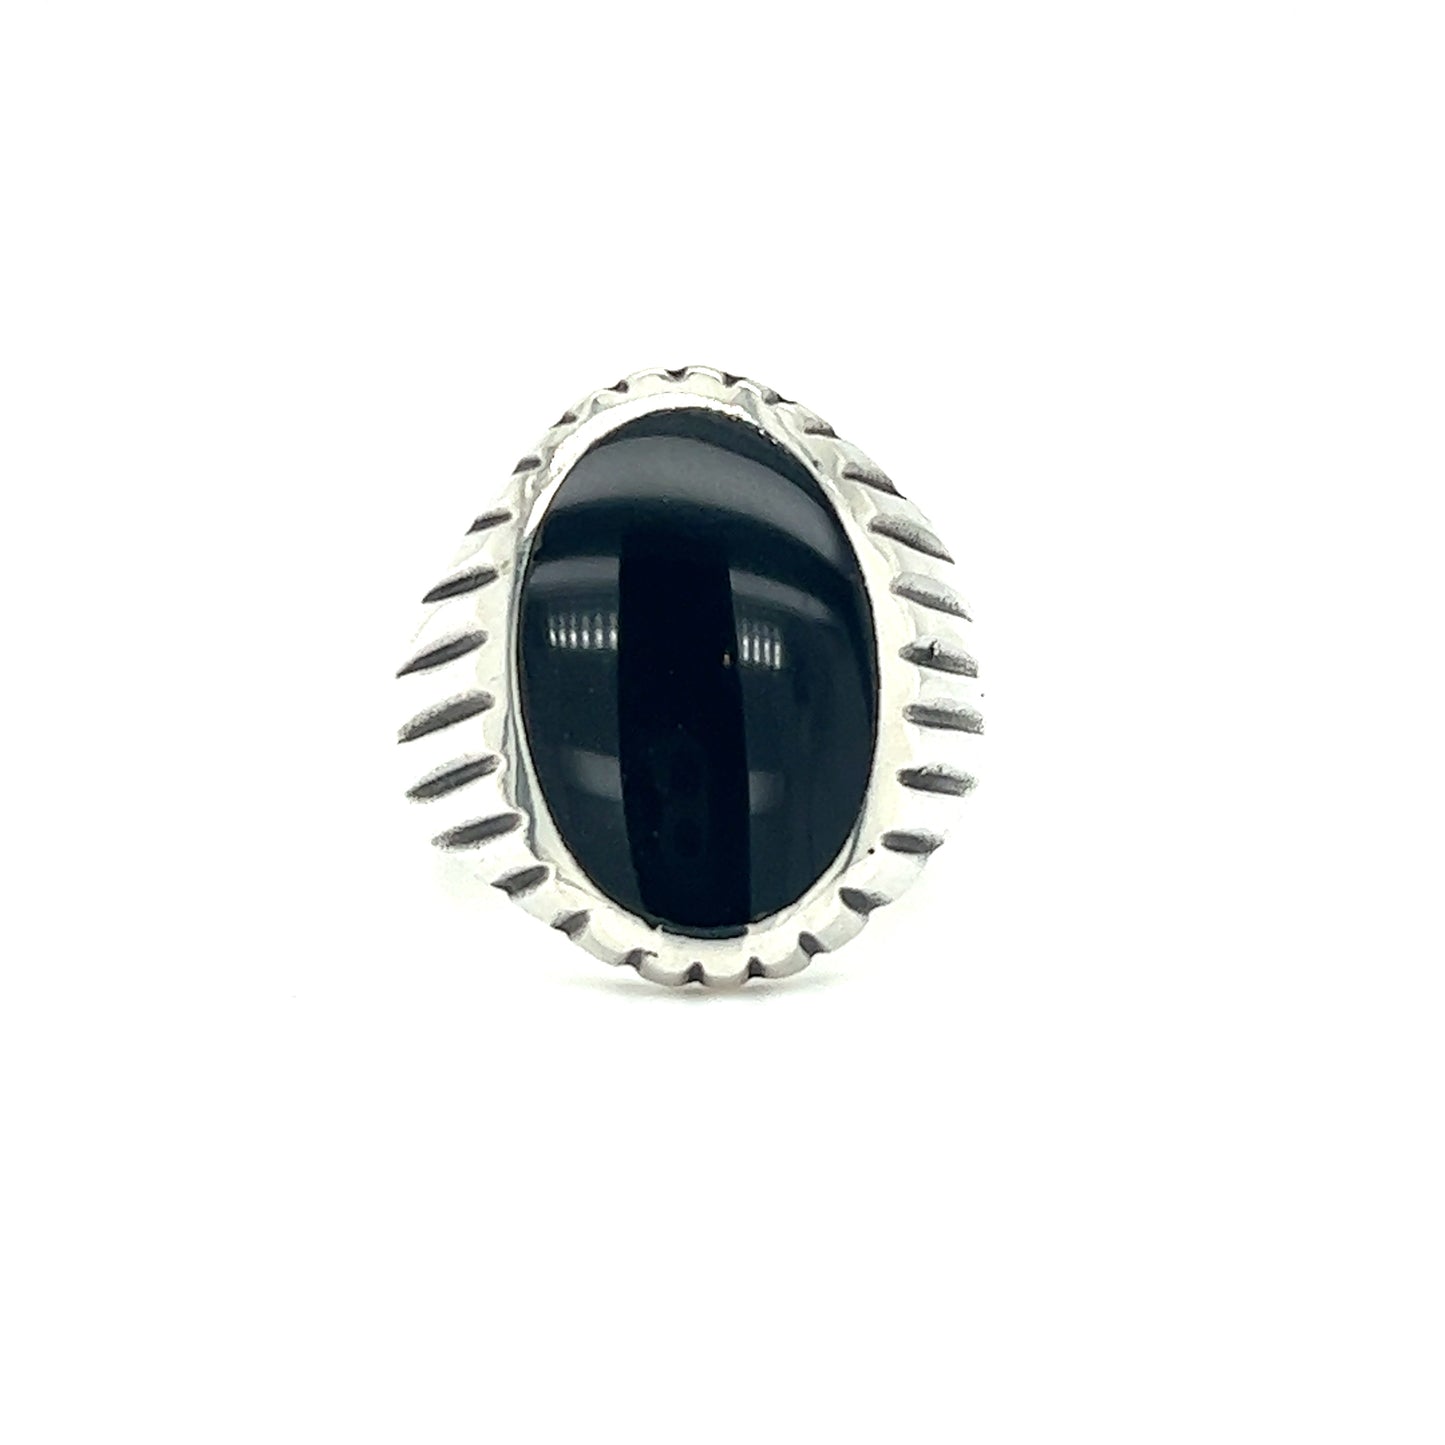 A minimalist silver Oval Onyx Ring With Fine Oxidized Scale Pattern for men, adorned with a black onyx stone.